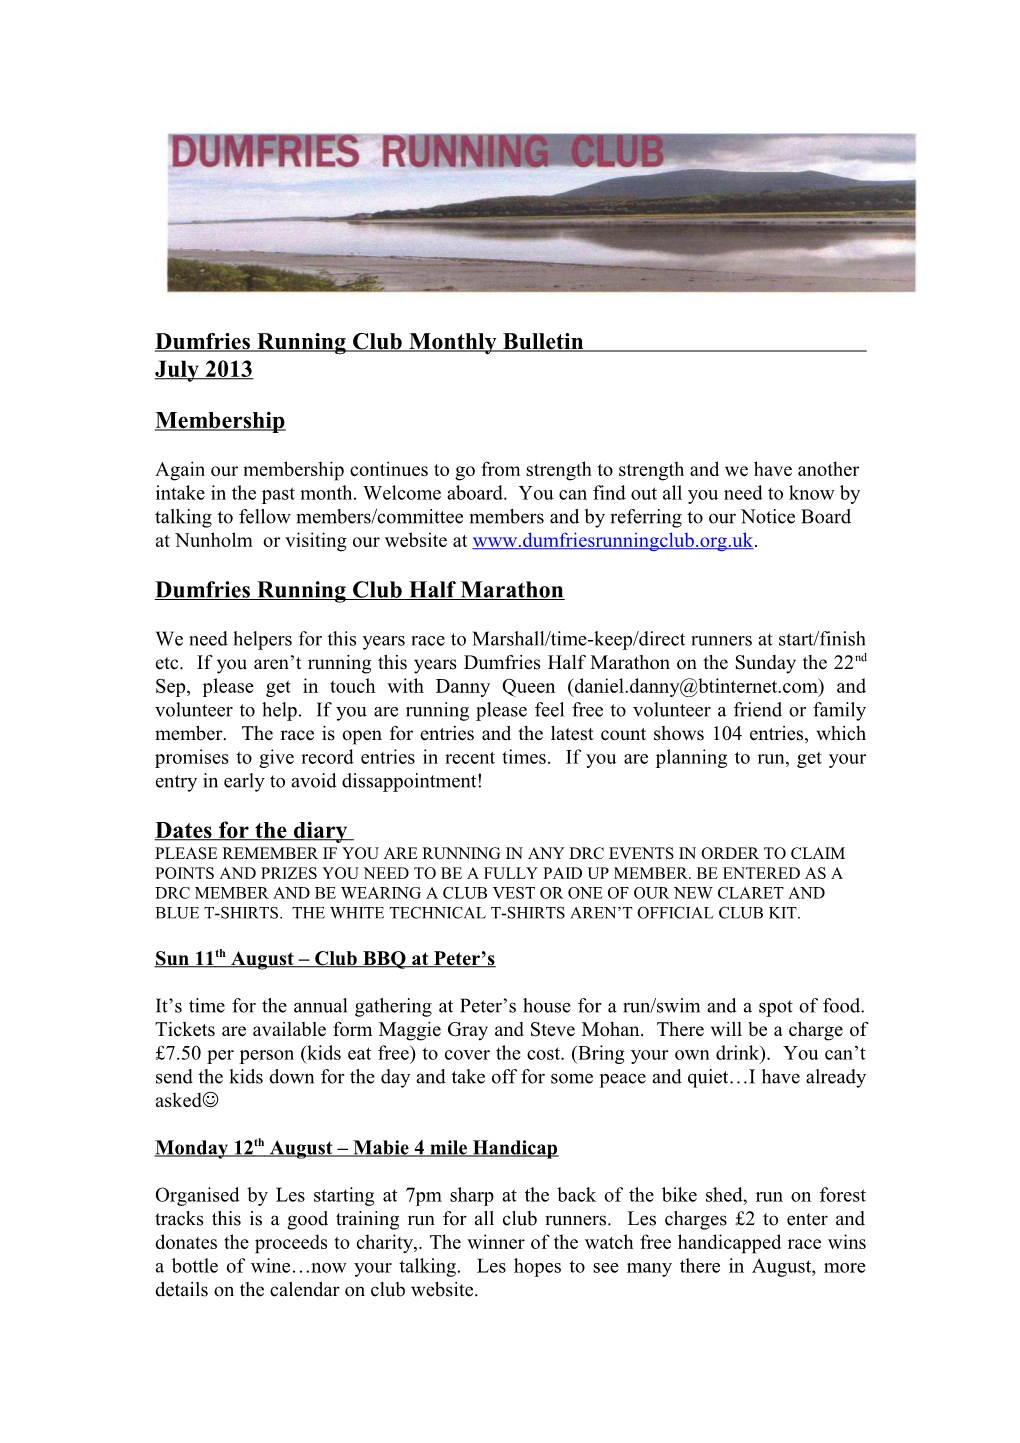 Dumfries Running Club Monthly Bulletin July 2013